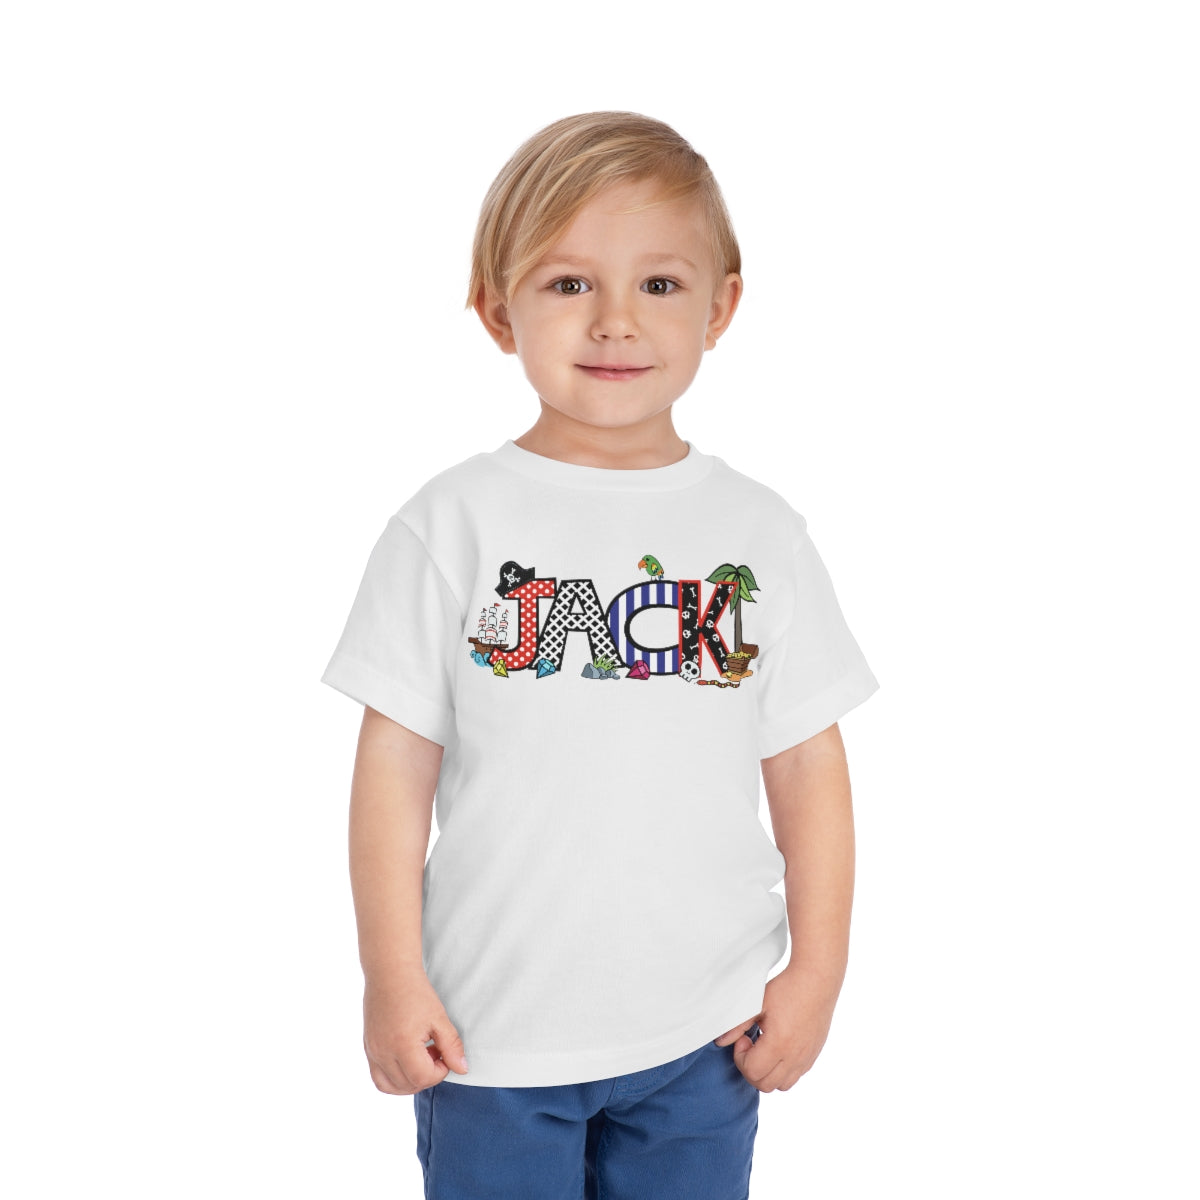 Pirate Personalized Toddler Shirt - Amazing Faith Designs